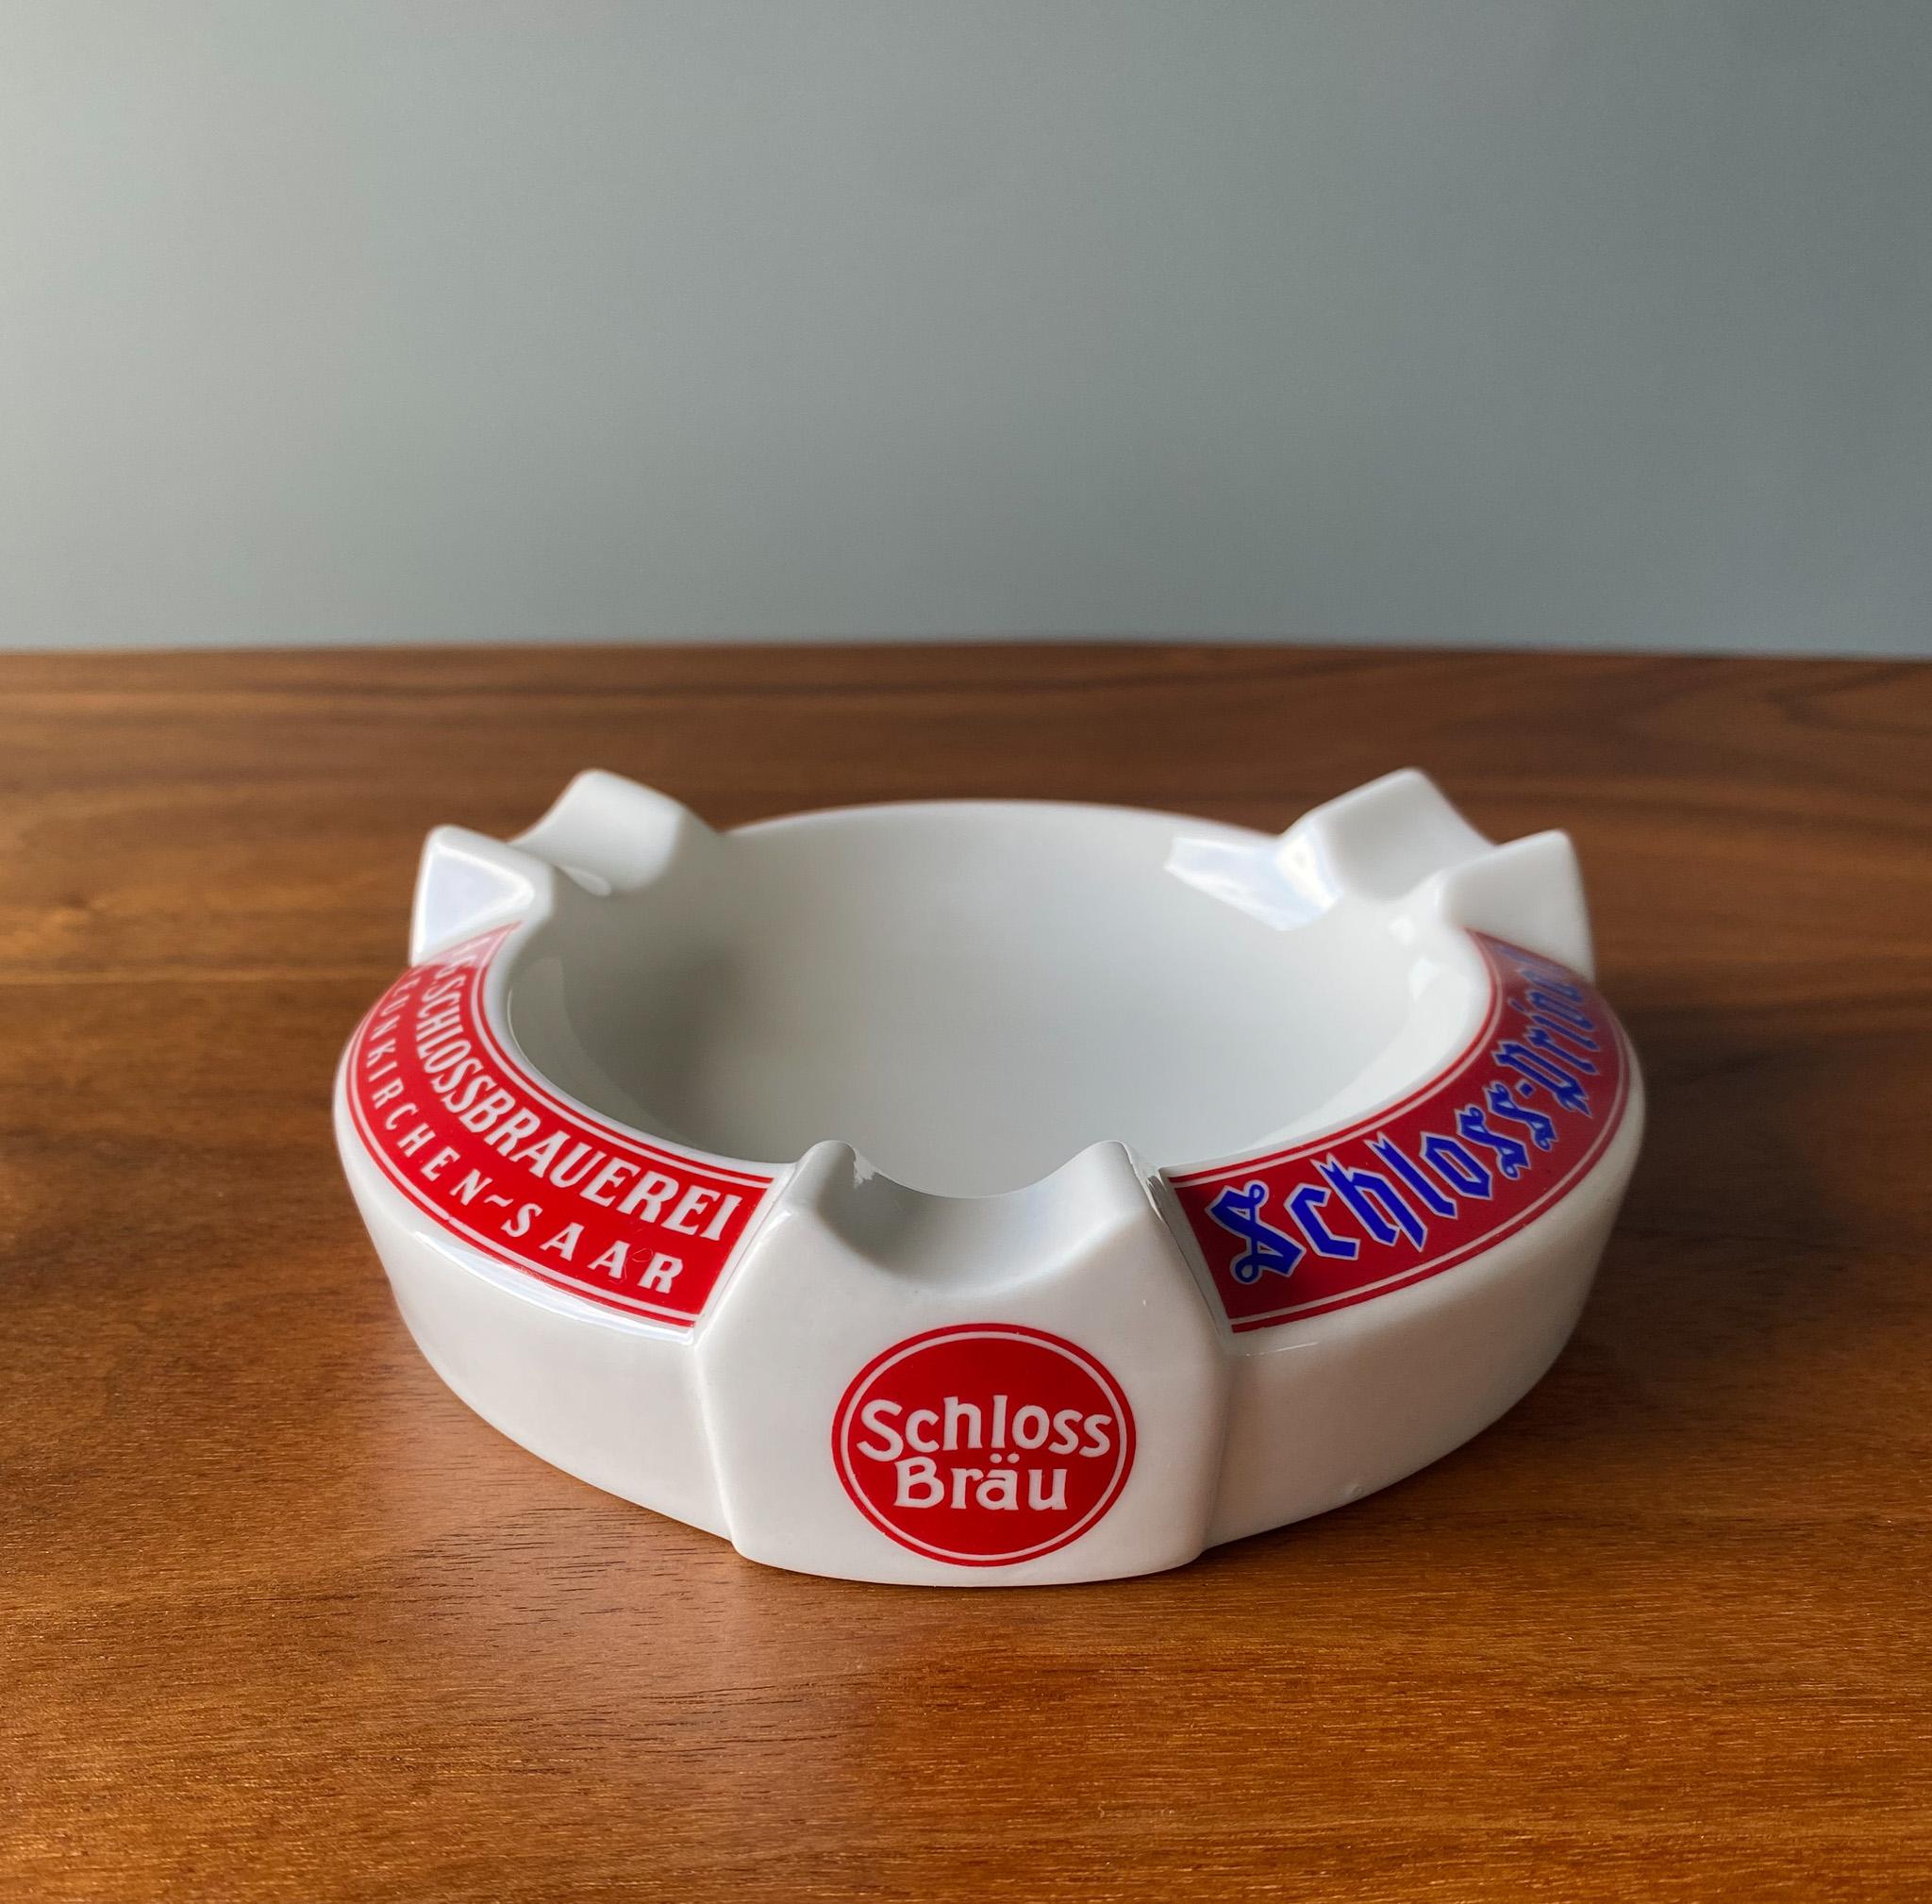 Vintage Schloss Brau Porcelain Ashtray by Fisher & Co. Germany In Good Condition For Sale In Costa Mesa, CA